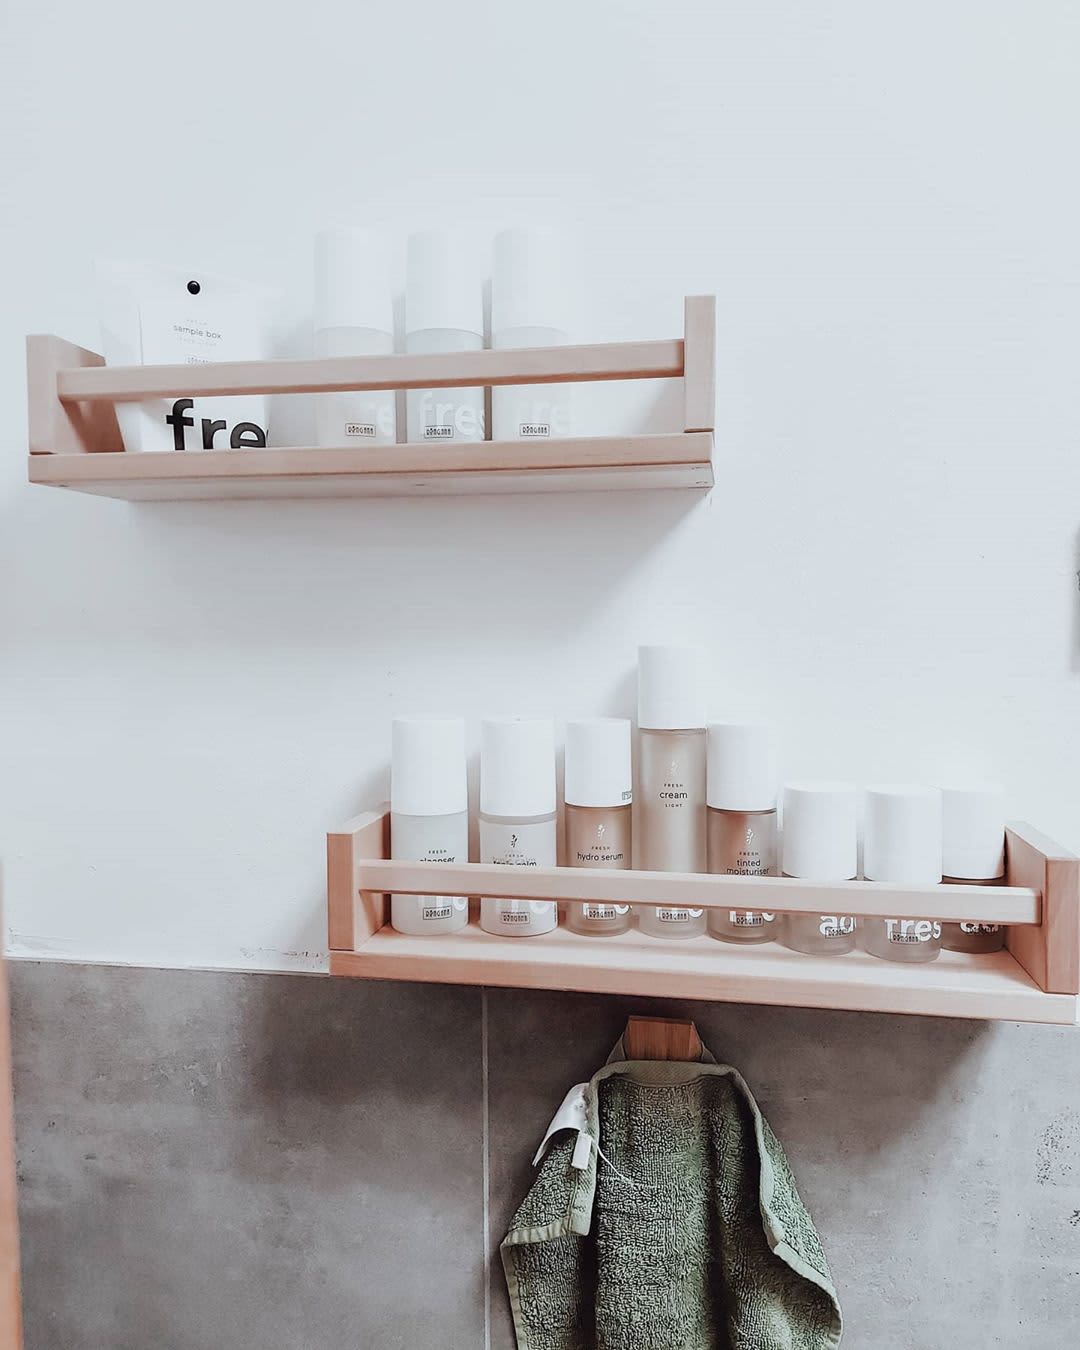 8 Clever IKEA Hacks That'll Make the Most of Your Tiny Bathroom  Clever  bathroom storage, Bathtub decor, Bathroom storage hacks